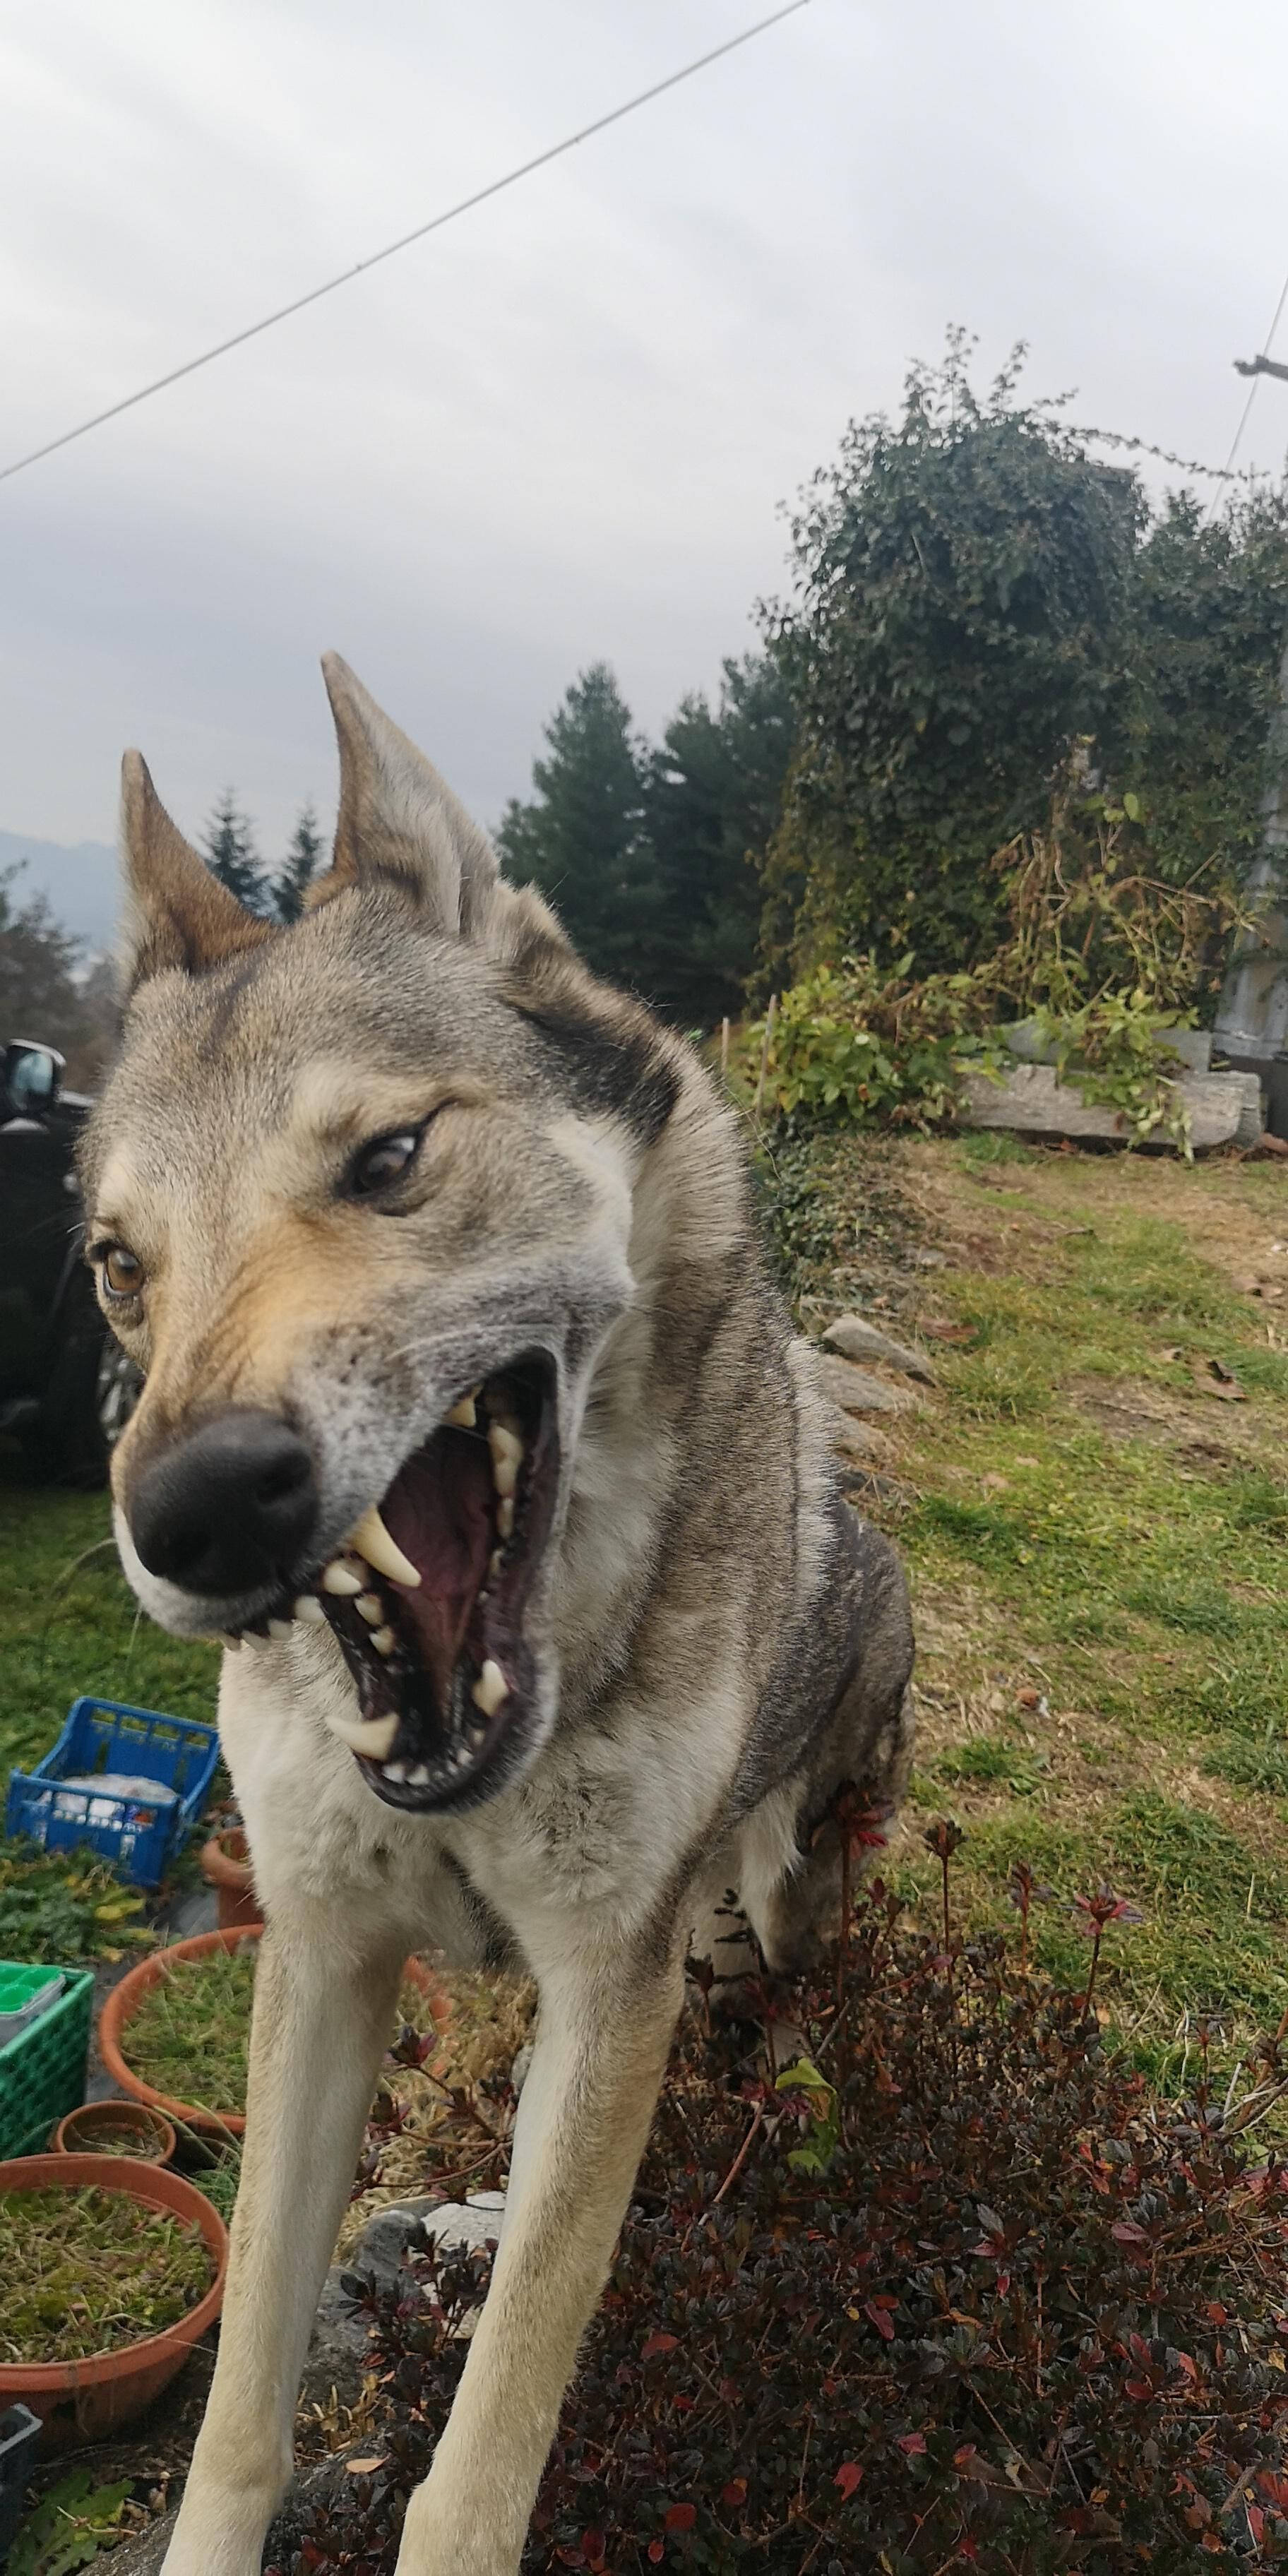 I cought my dog in the middle of a yawn